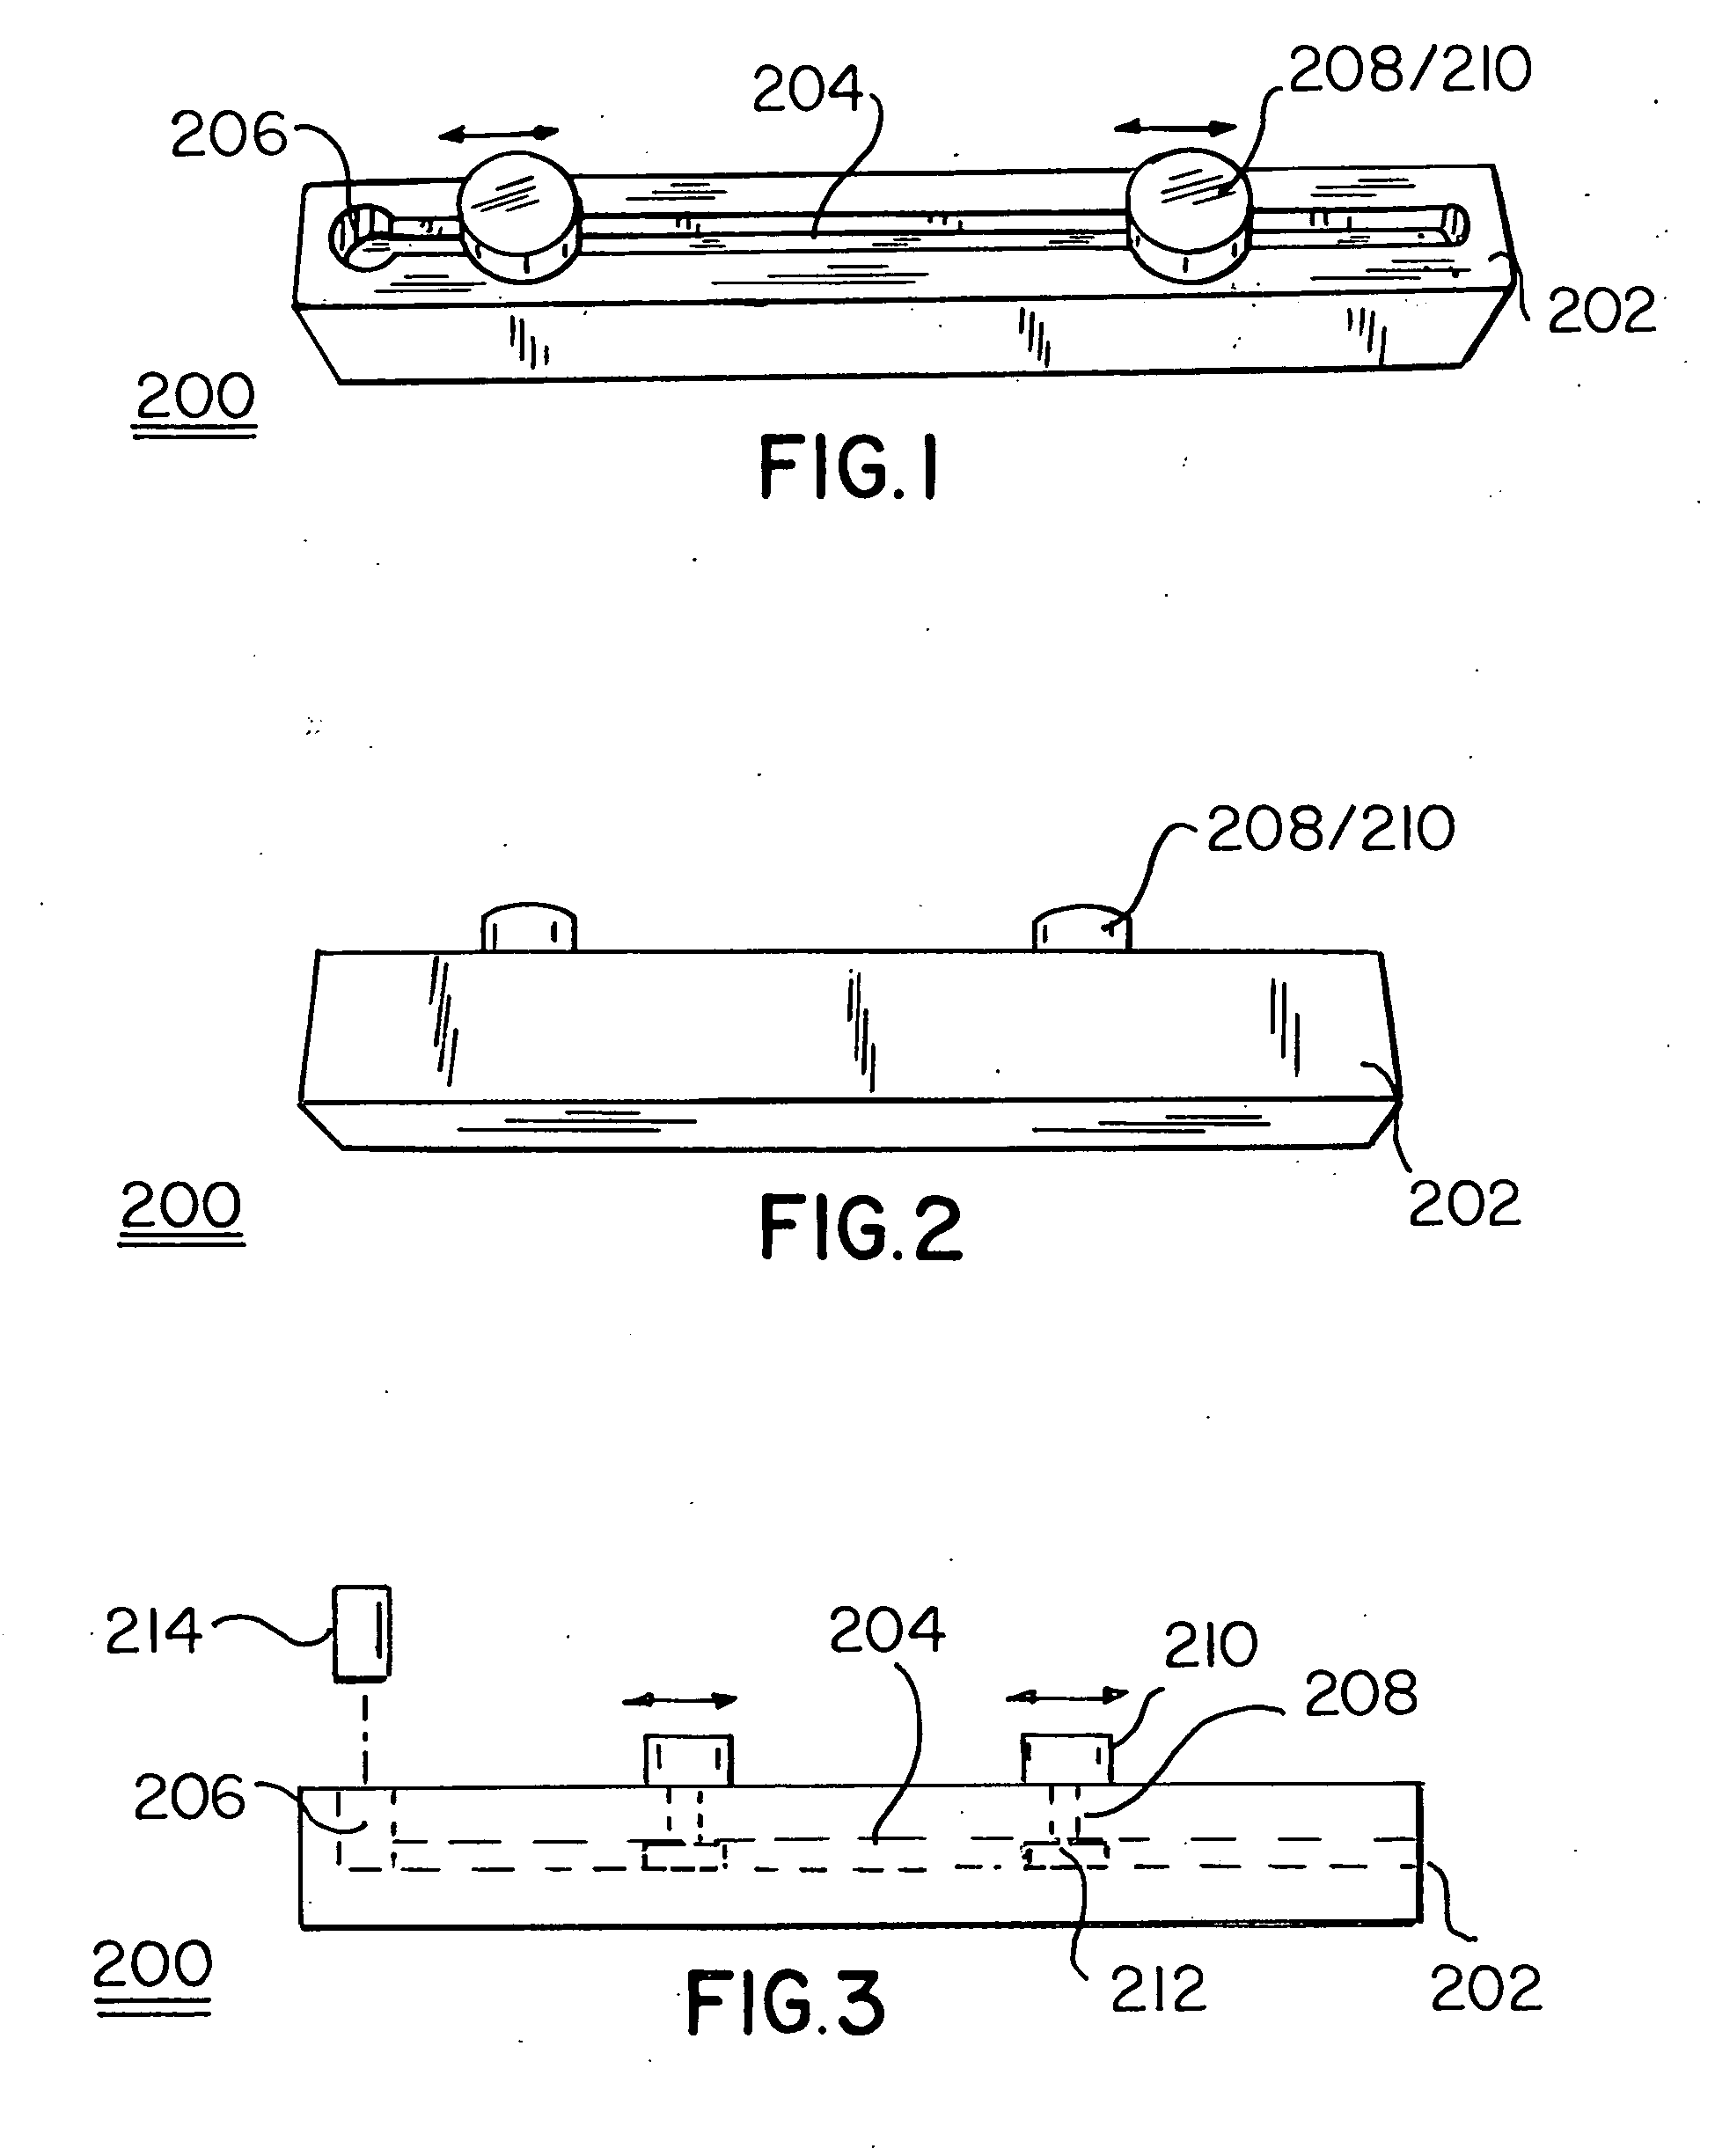 Cover plate removal tool